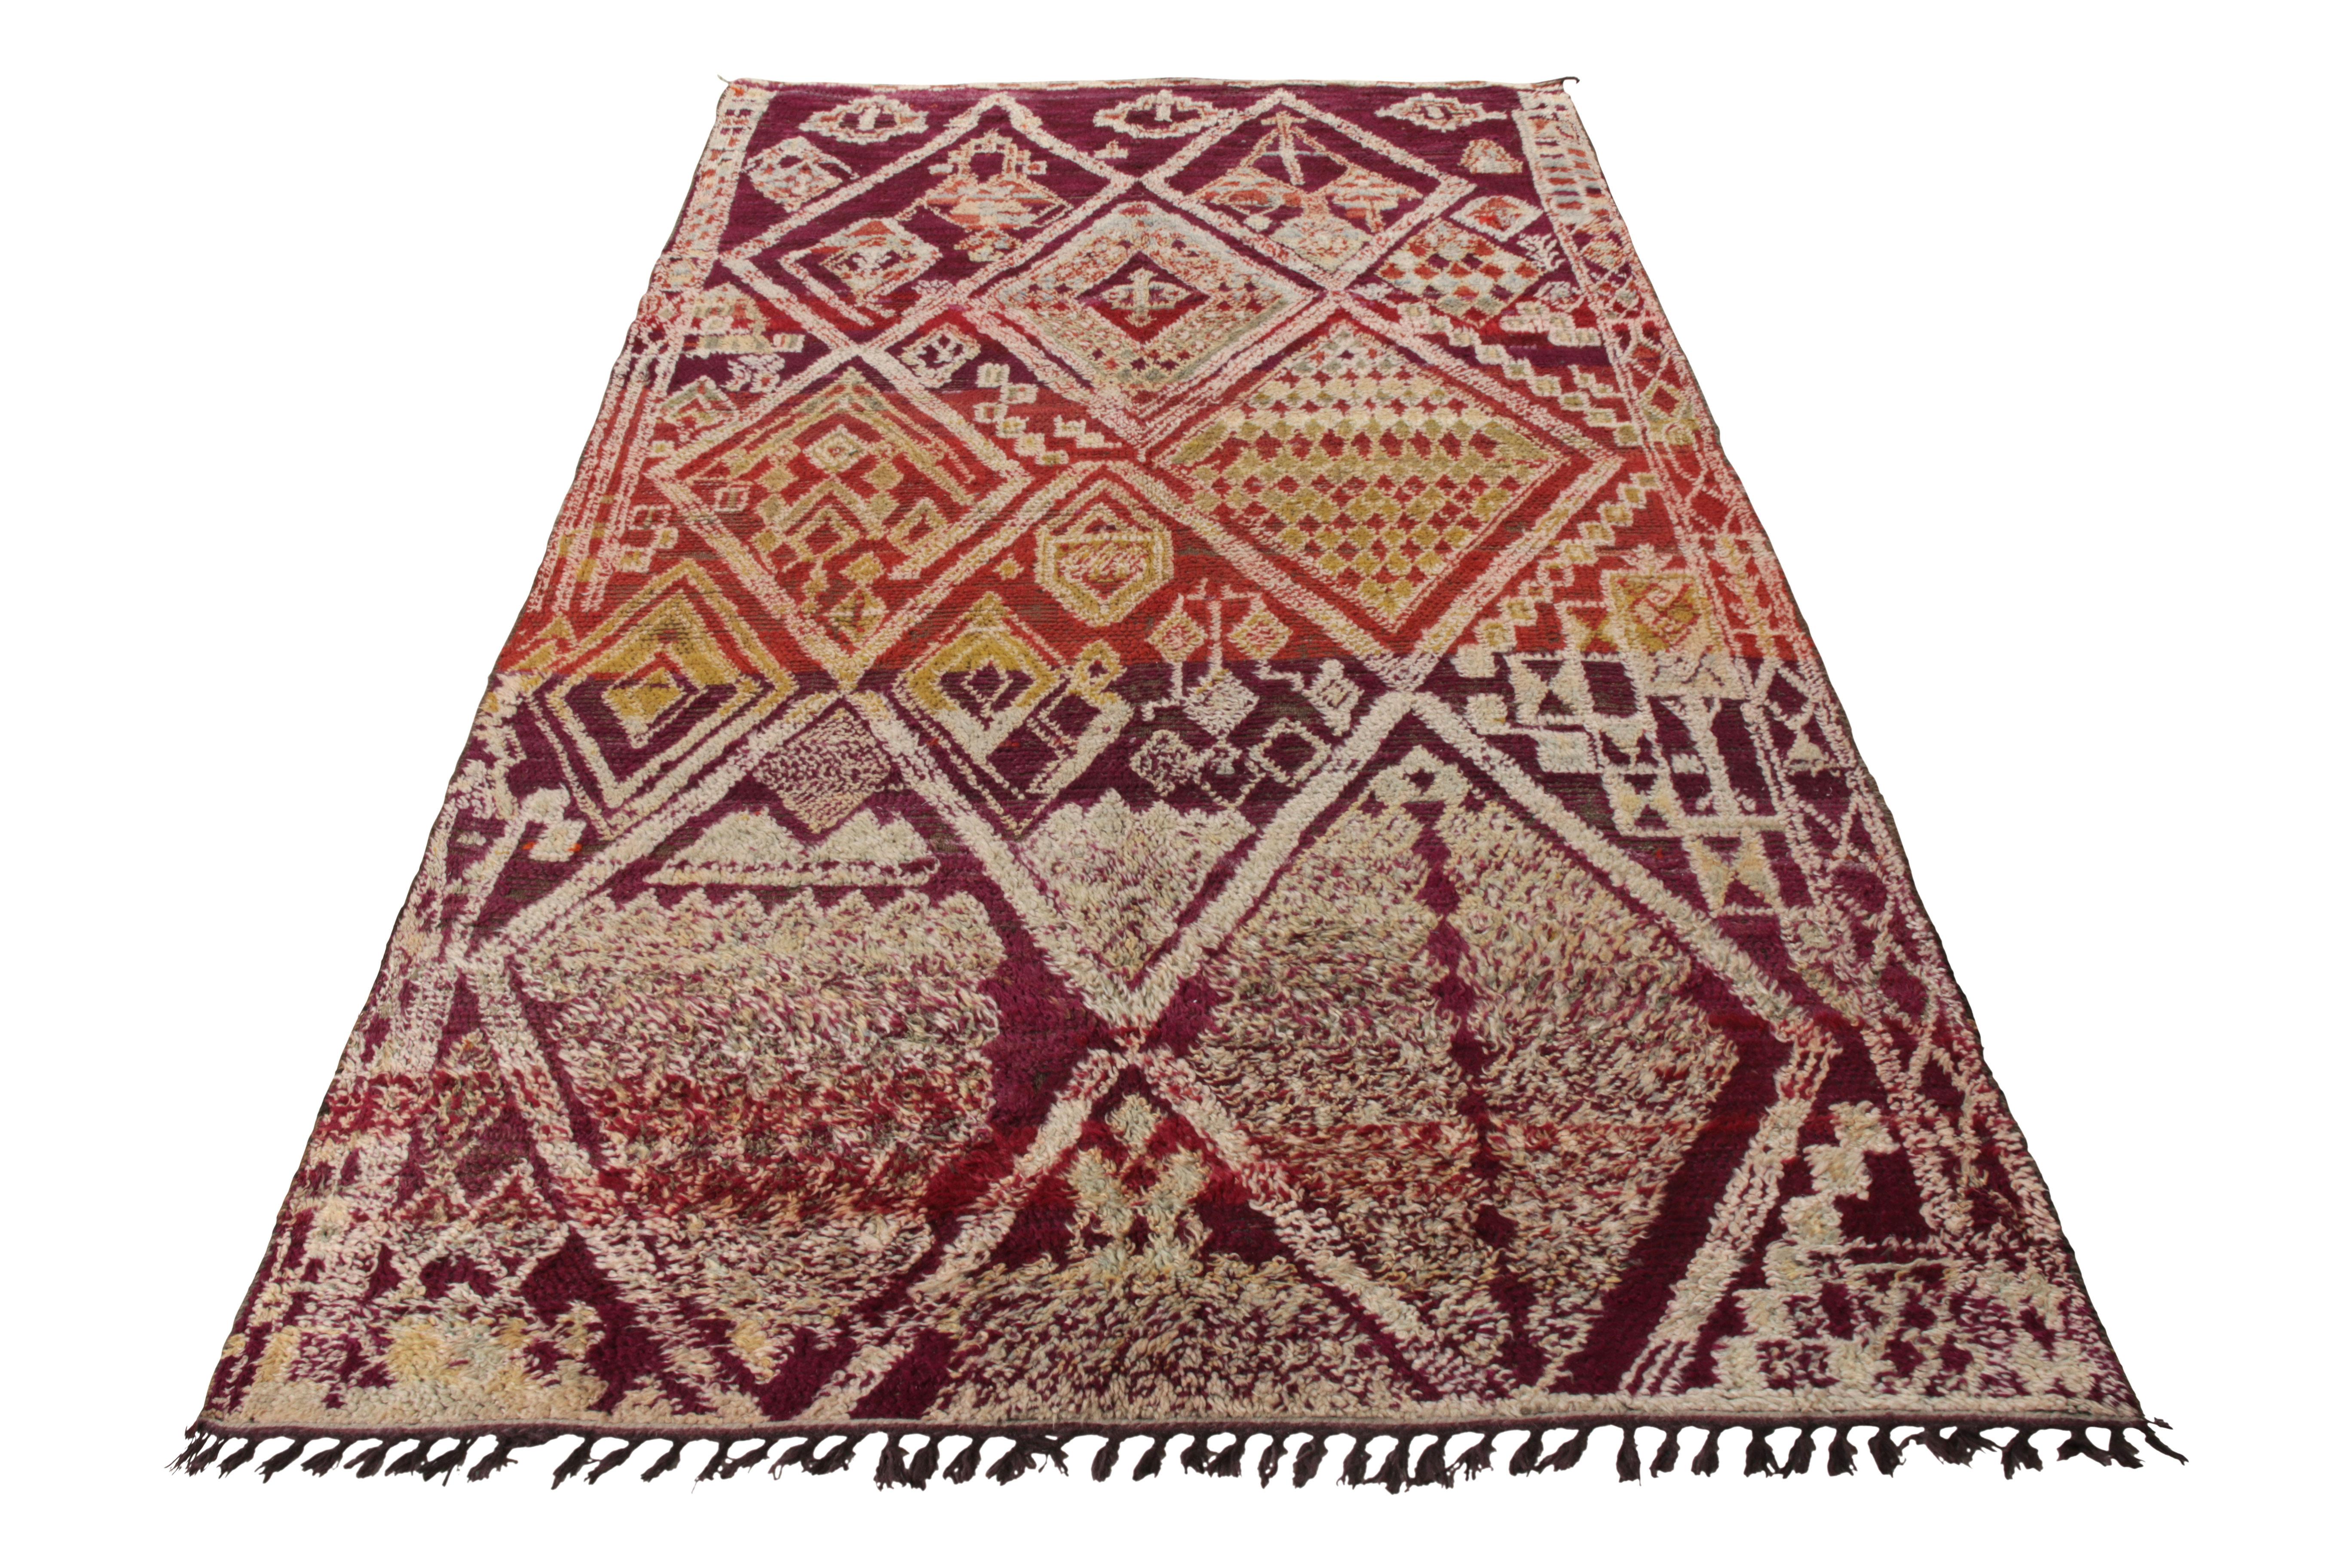 Hand-knotted in wool circa 1950-1960, a vintage Moroccan Berber rug joining Rug & Kilim’s Antique & Vintage Collection. Featuring a gorgeously rich, uniquely defined, sharp geometric pattern in red, white and green, the rug boasts a creative